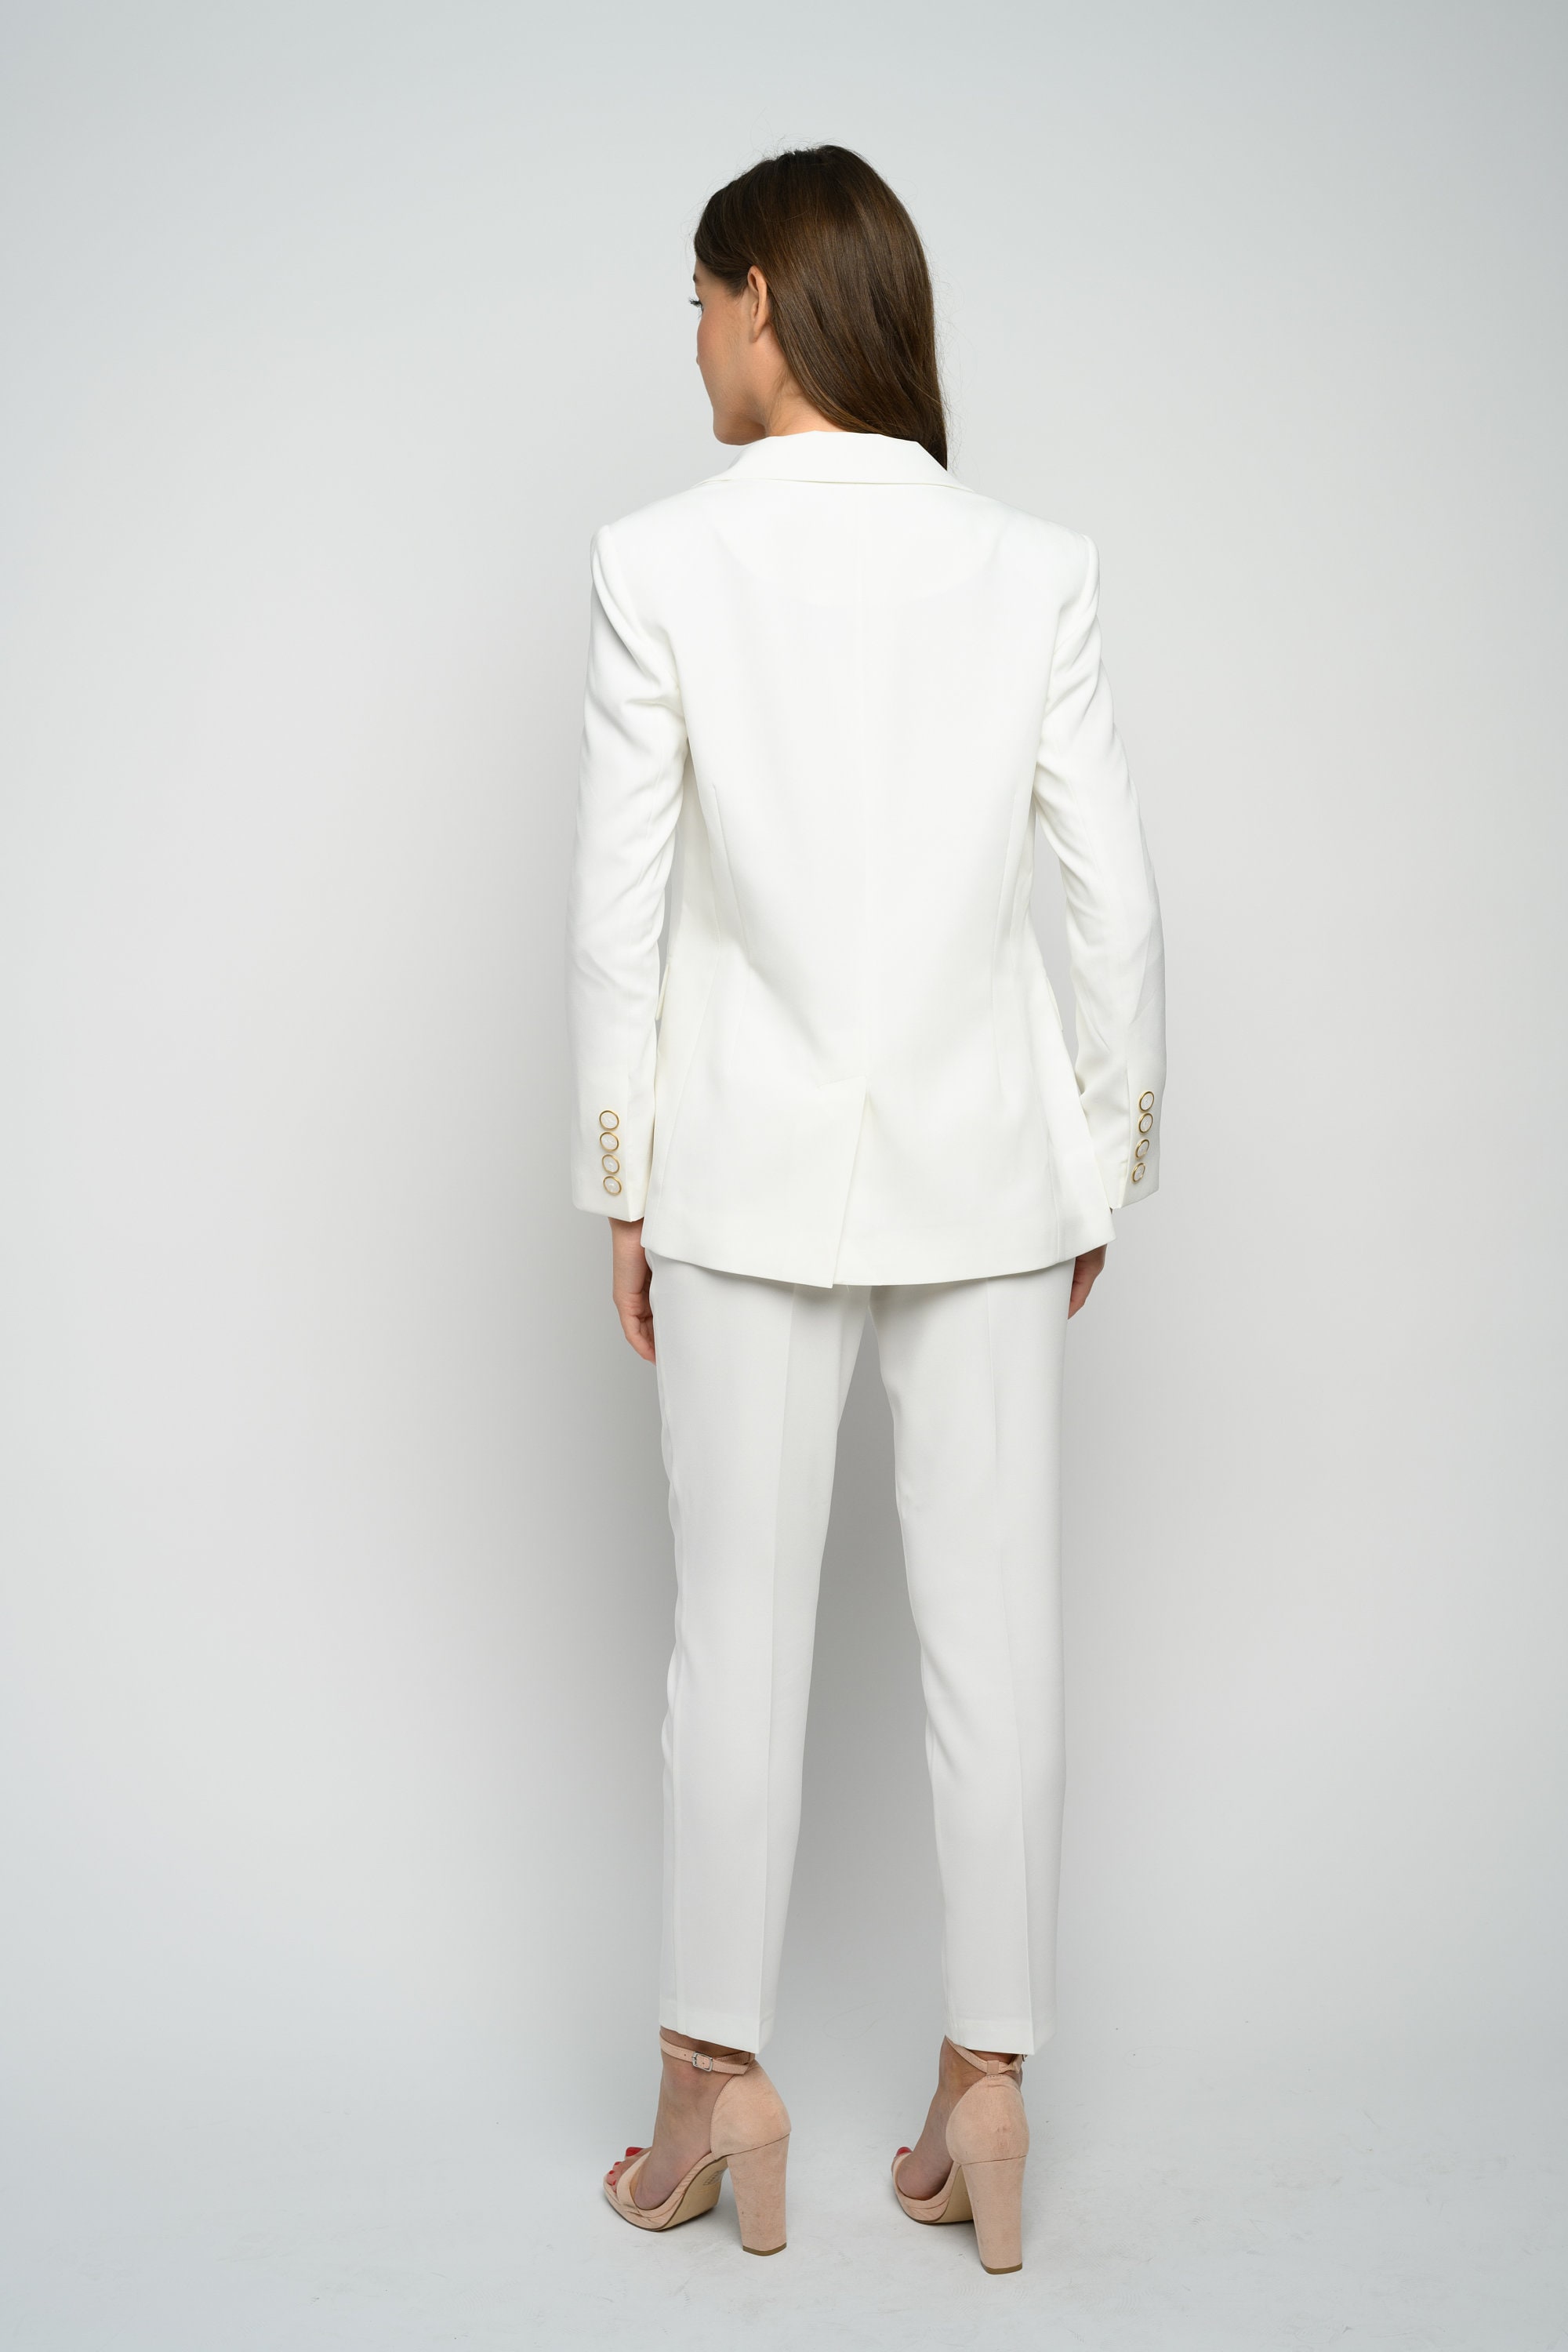 Women's 2-piece Ivory Slim Fit Luxe Suit Perfect for - Etsy